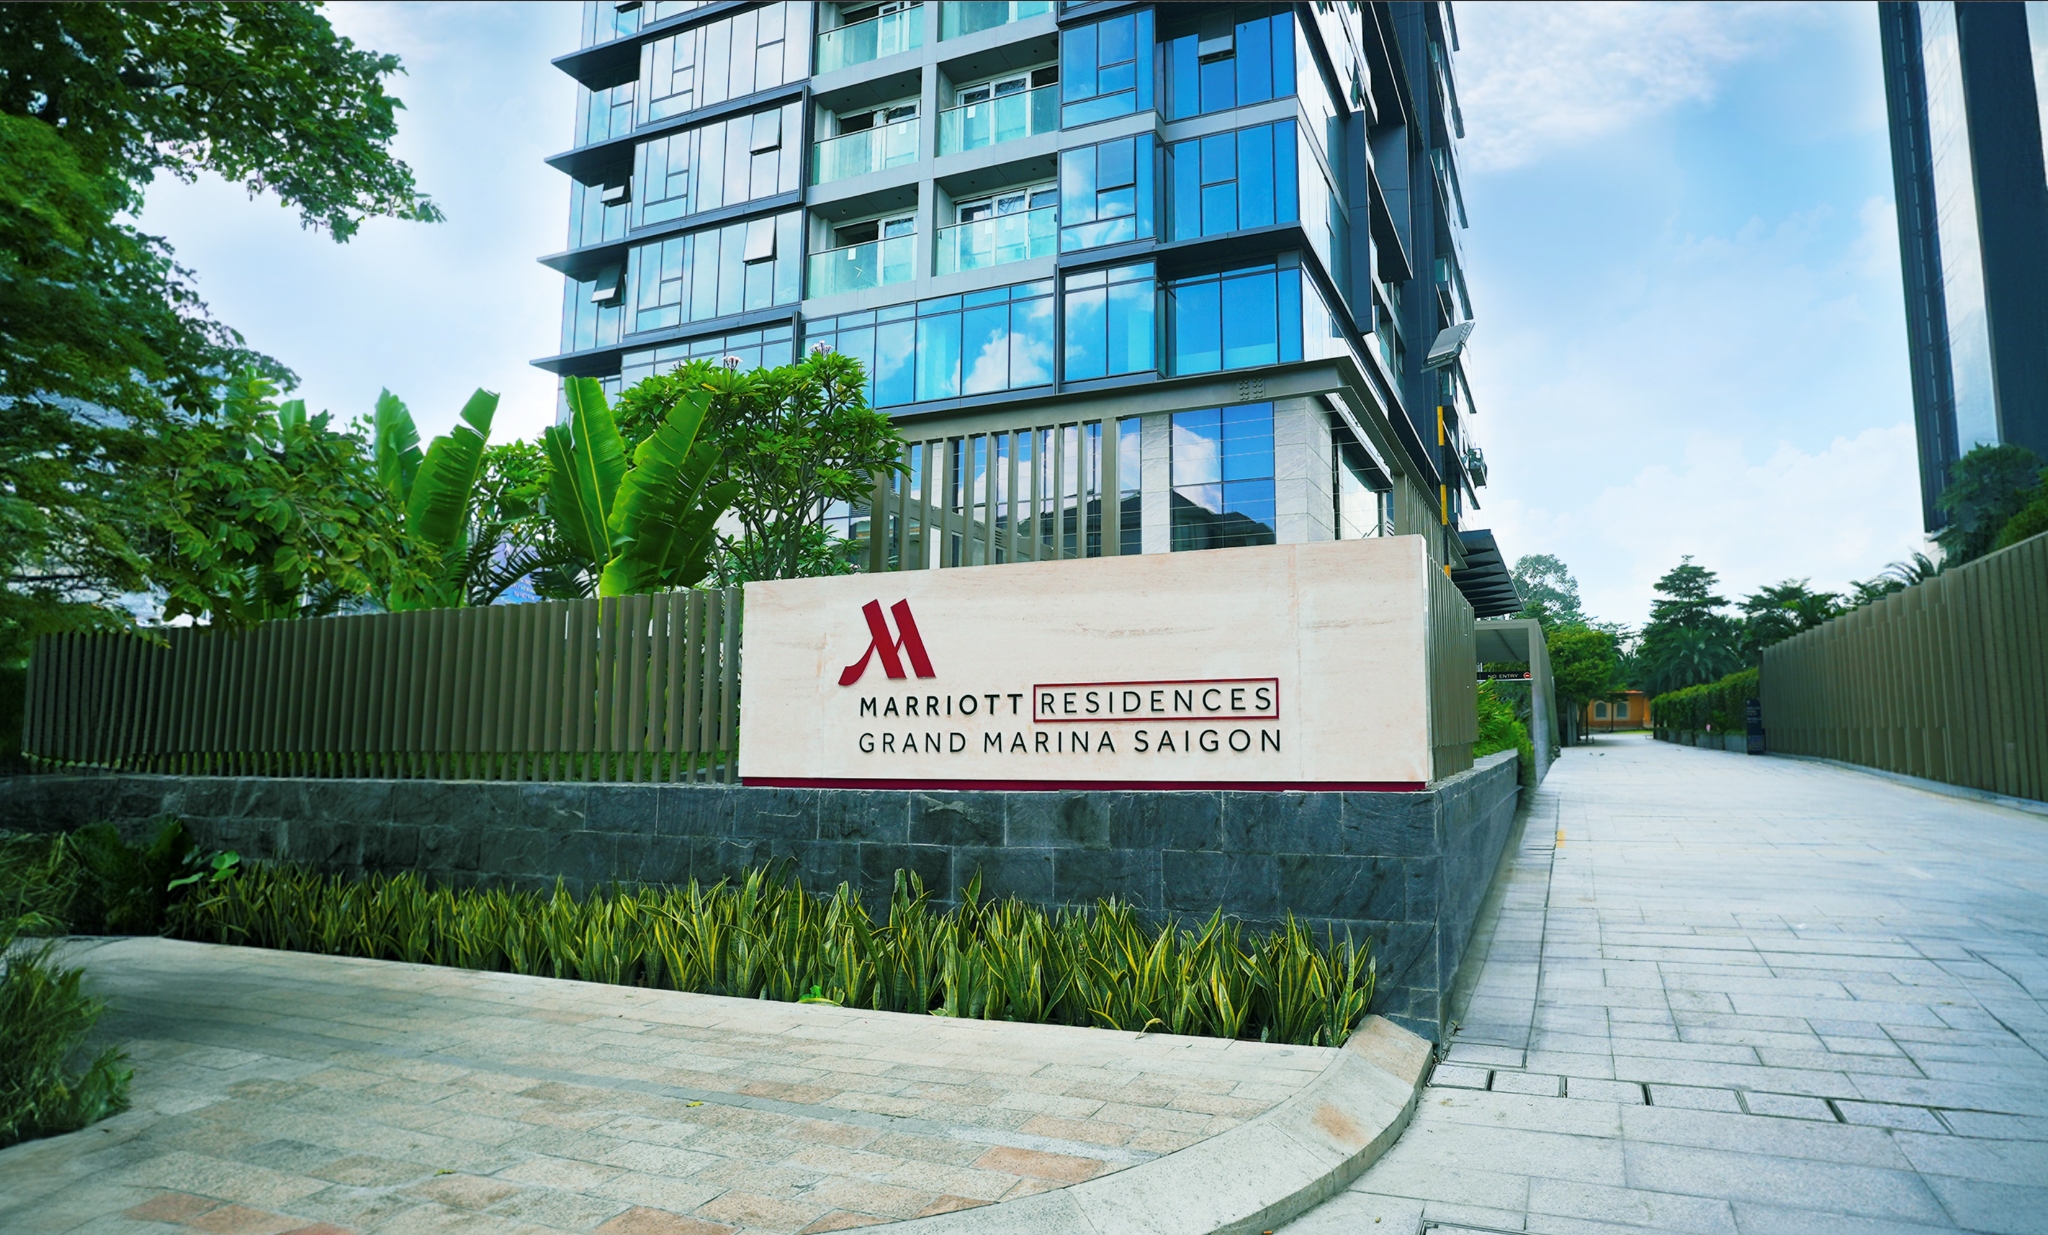 Developed by Masterise Homes, Marriott Residences Grand Marina Saigon is meticulously crafted to evolve into a sophisticated high-end complex in alignment with the Ho Chi Minh City Department of Planning and Architecture's vision.